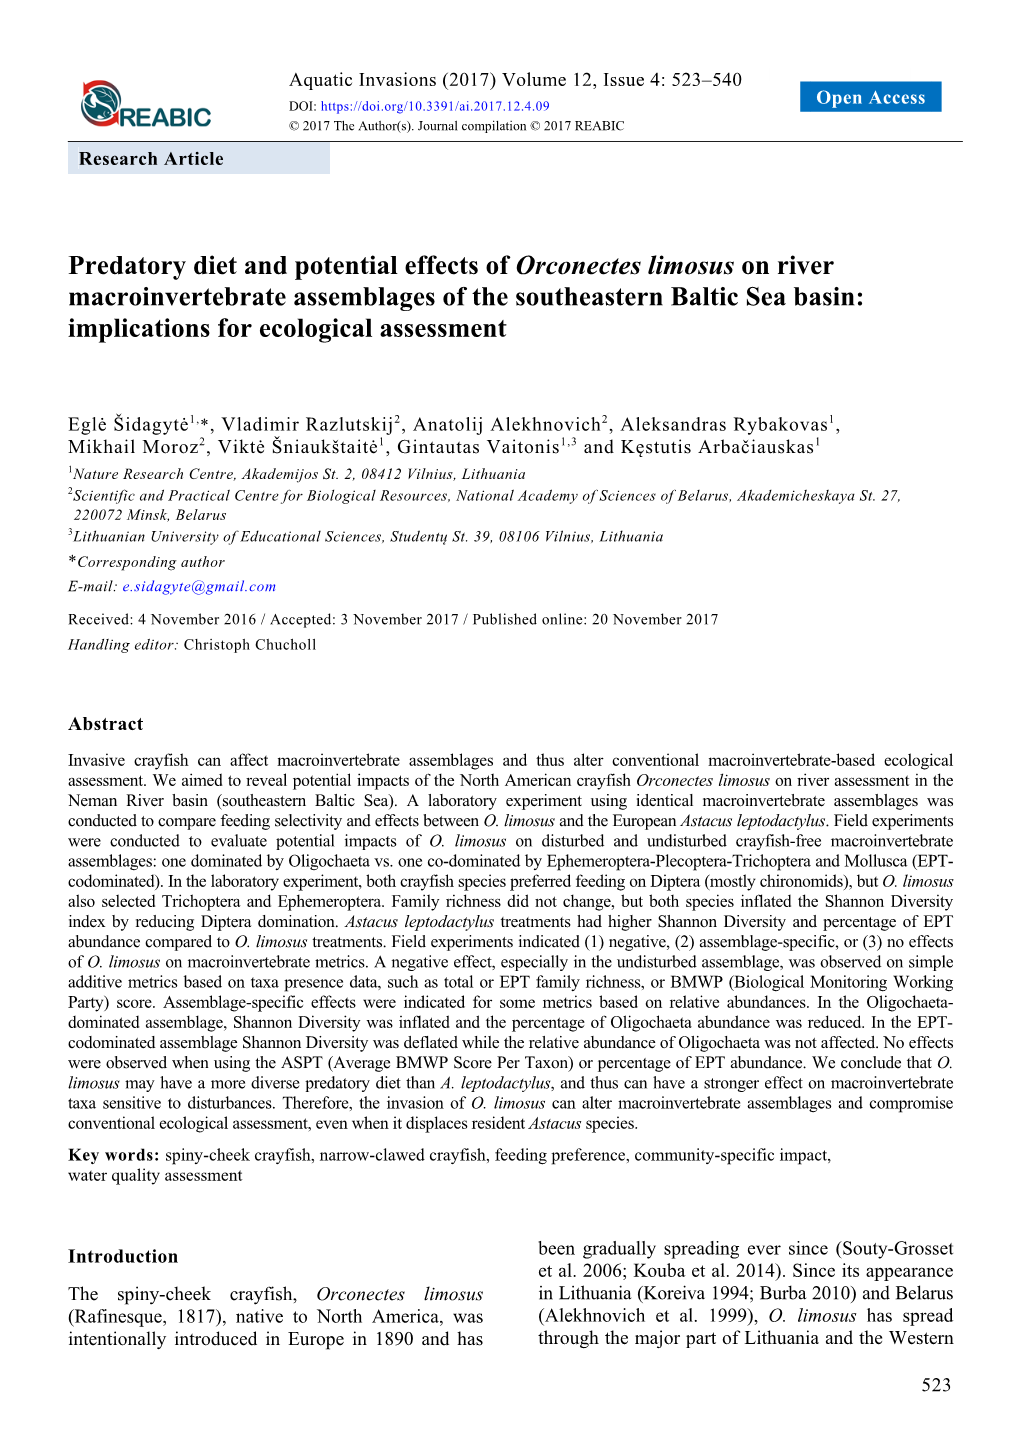 Predatory Diet and Potential Effects of Orconectes Limosus on River